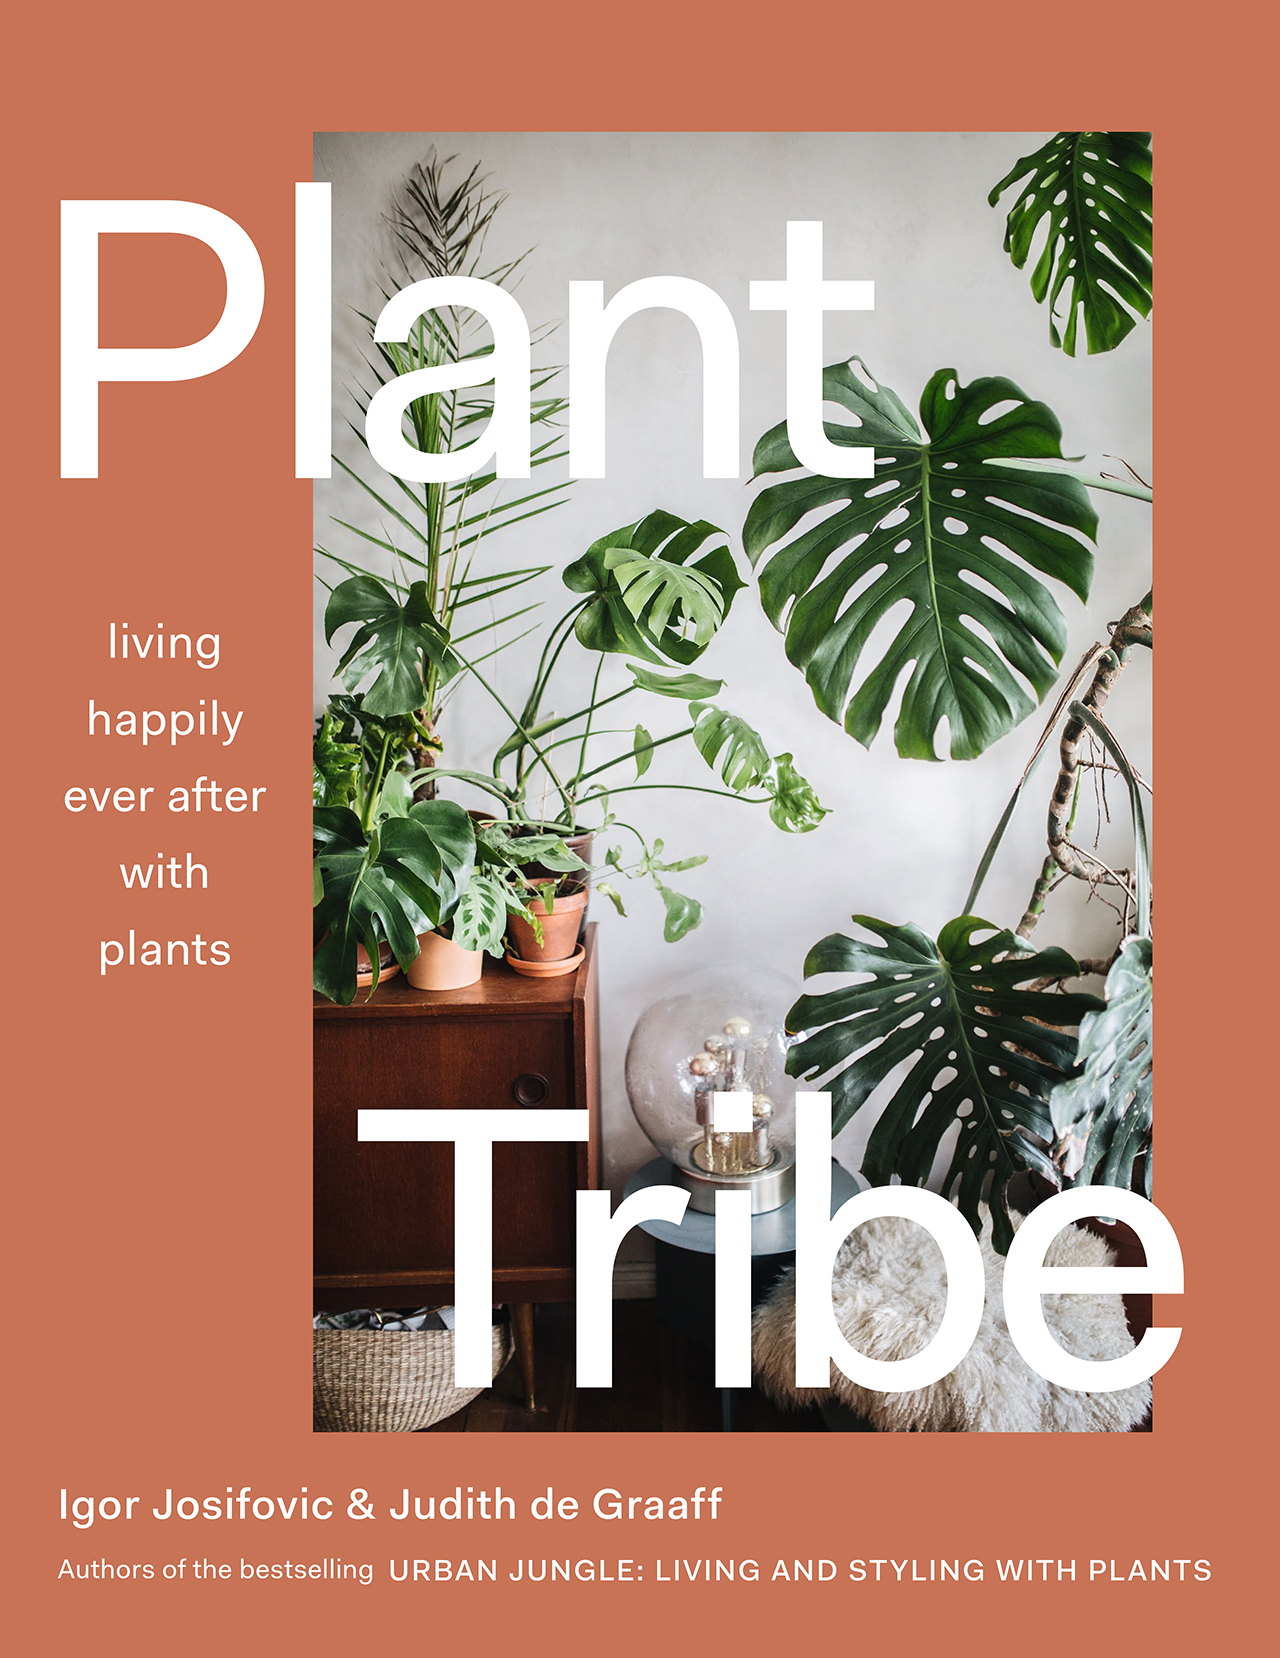 PLANT TRIBE (Living happily ever after with plants) by Igor Josifovic & Judith de Graaff. © ABRAMS Books.